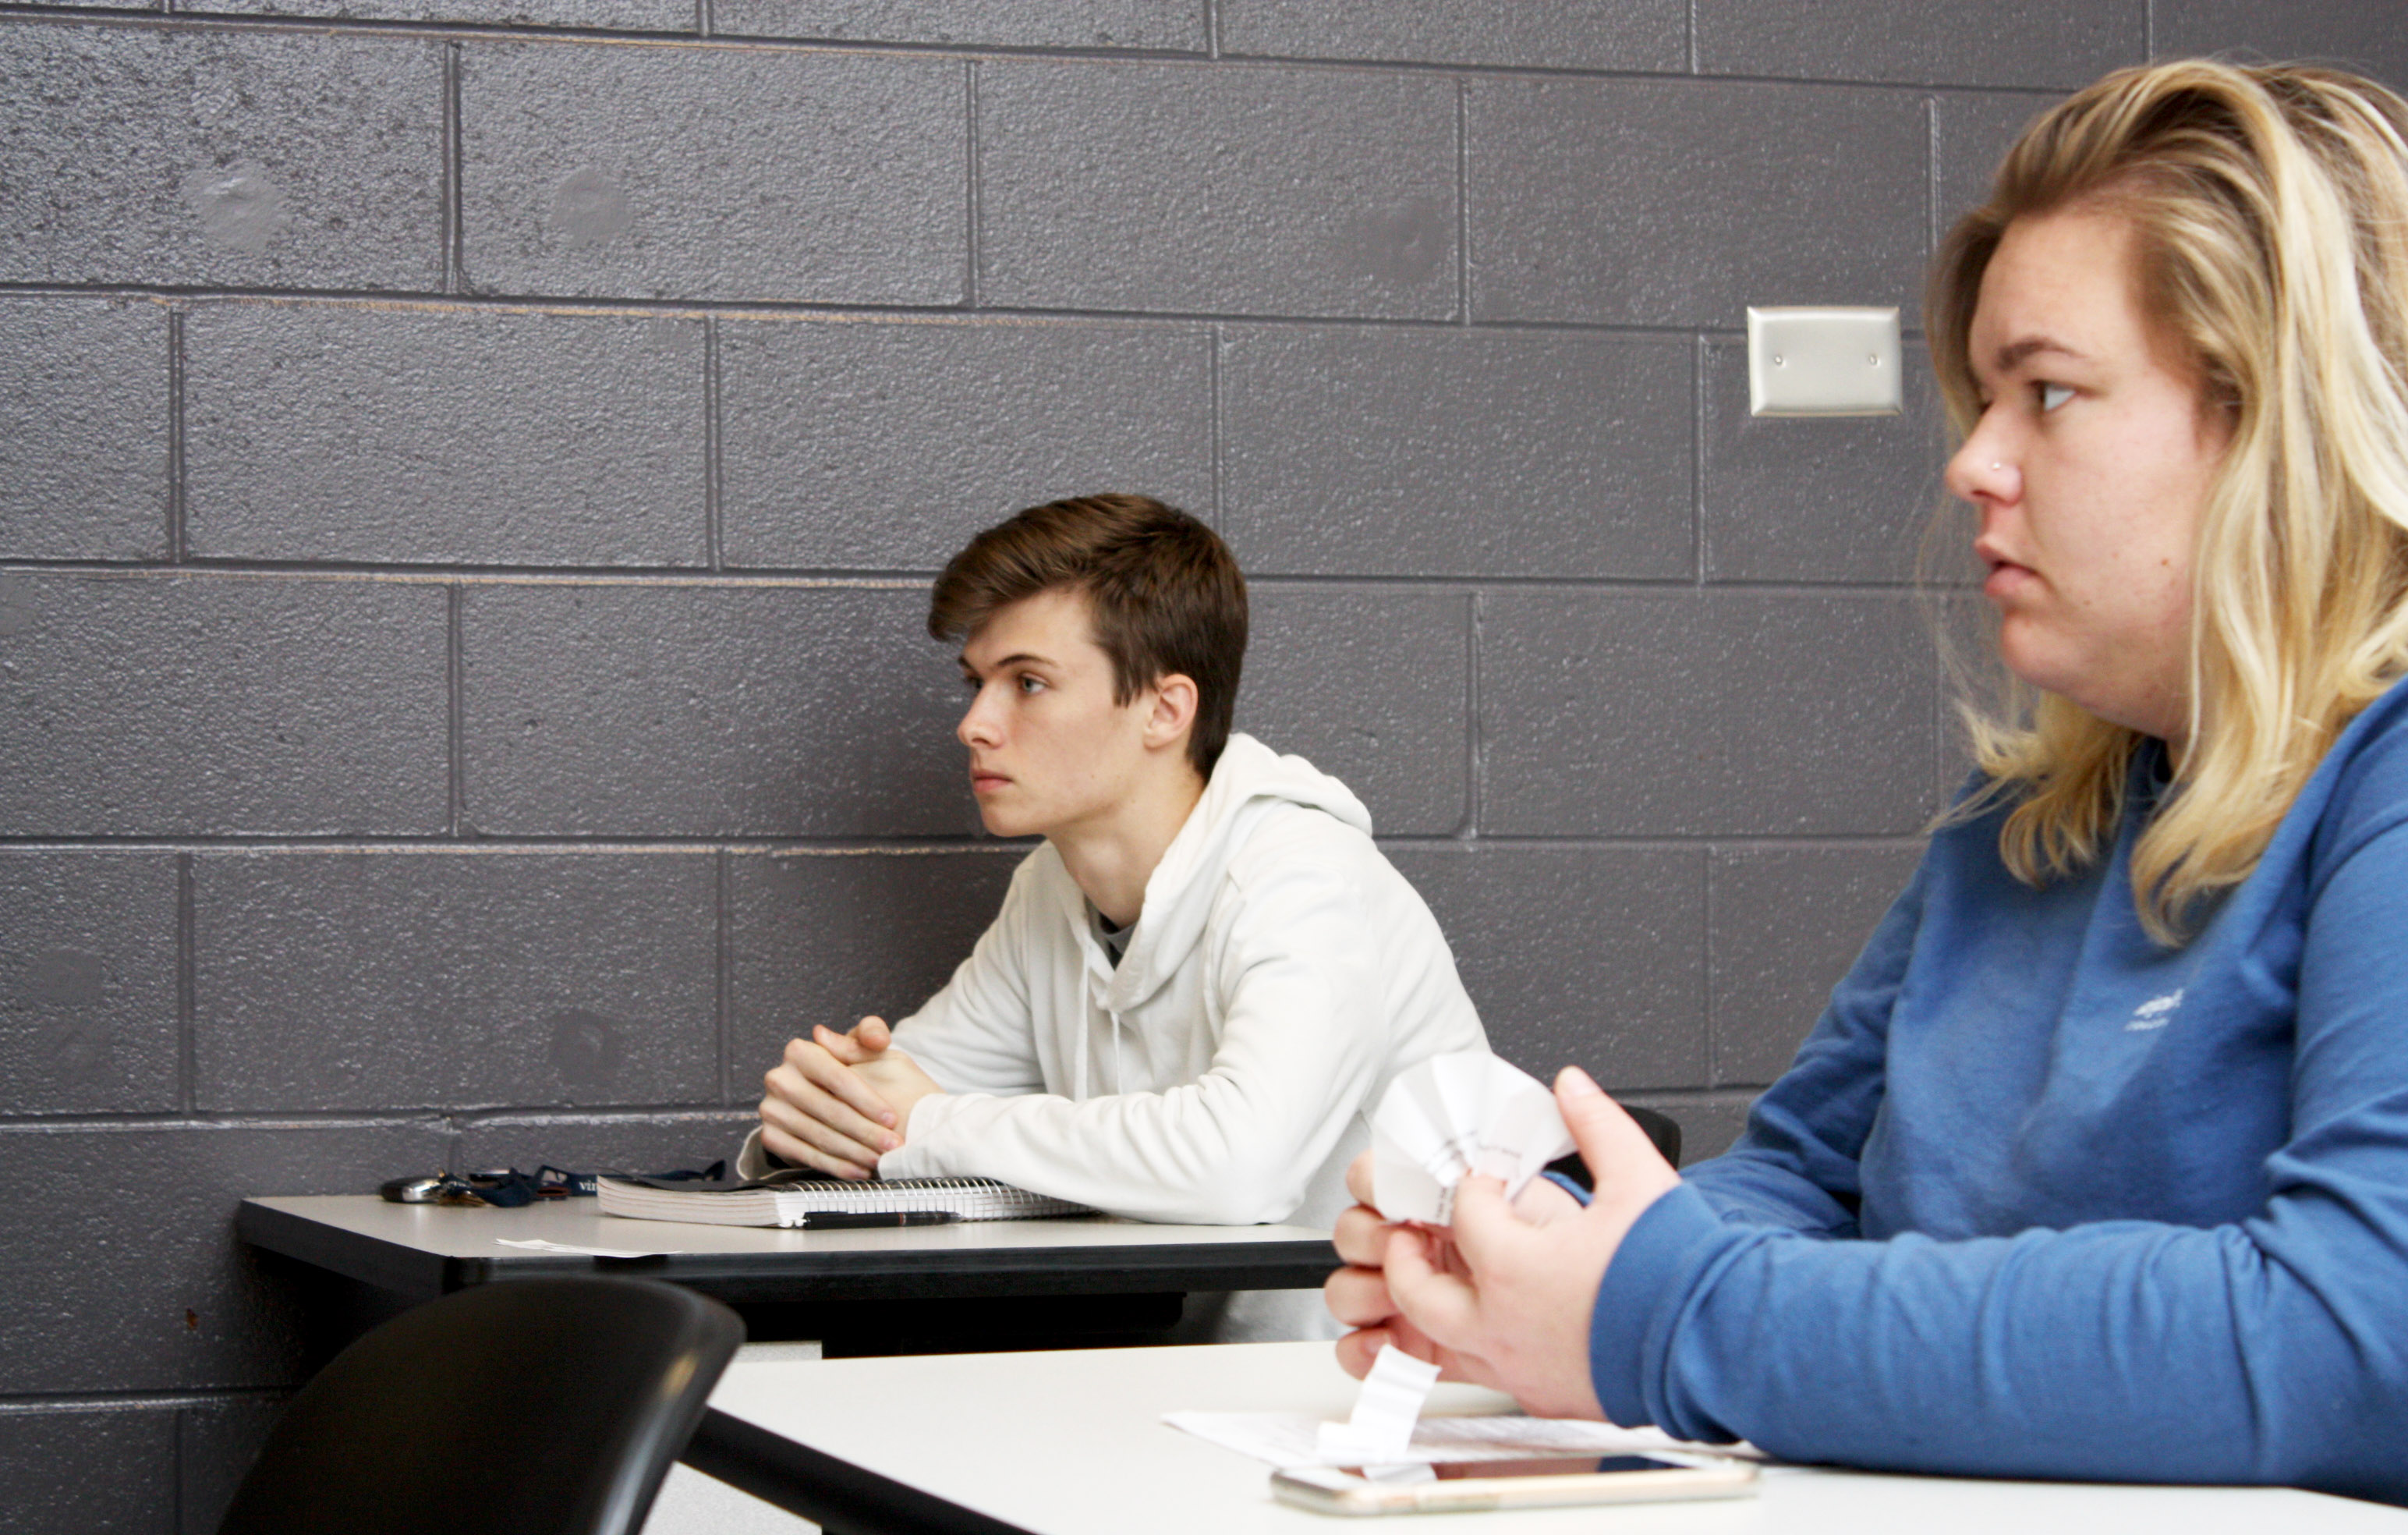 A male student sits at a desk with a female student to the right.